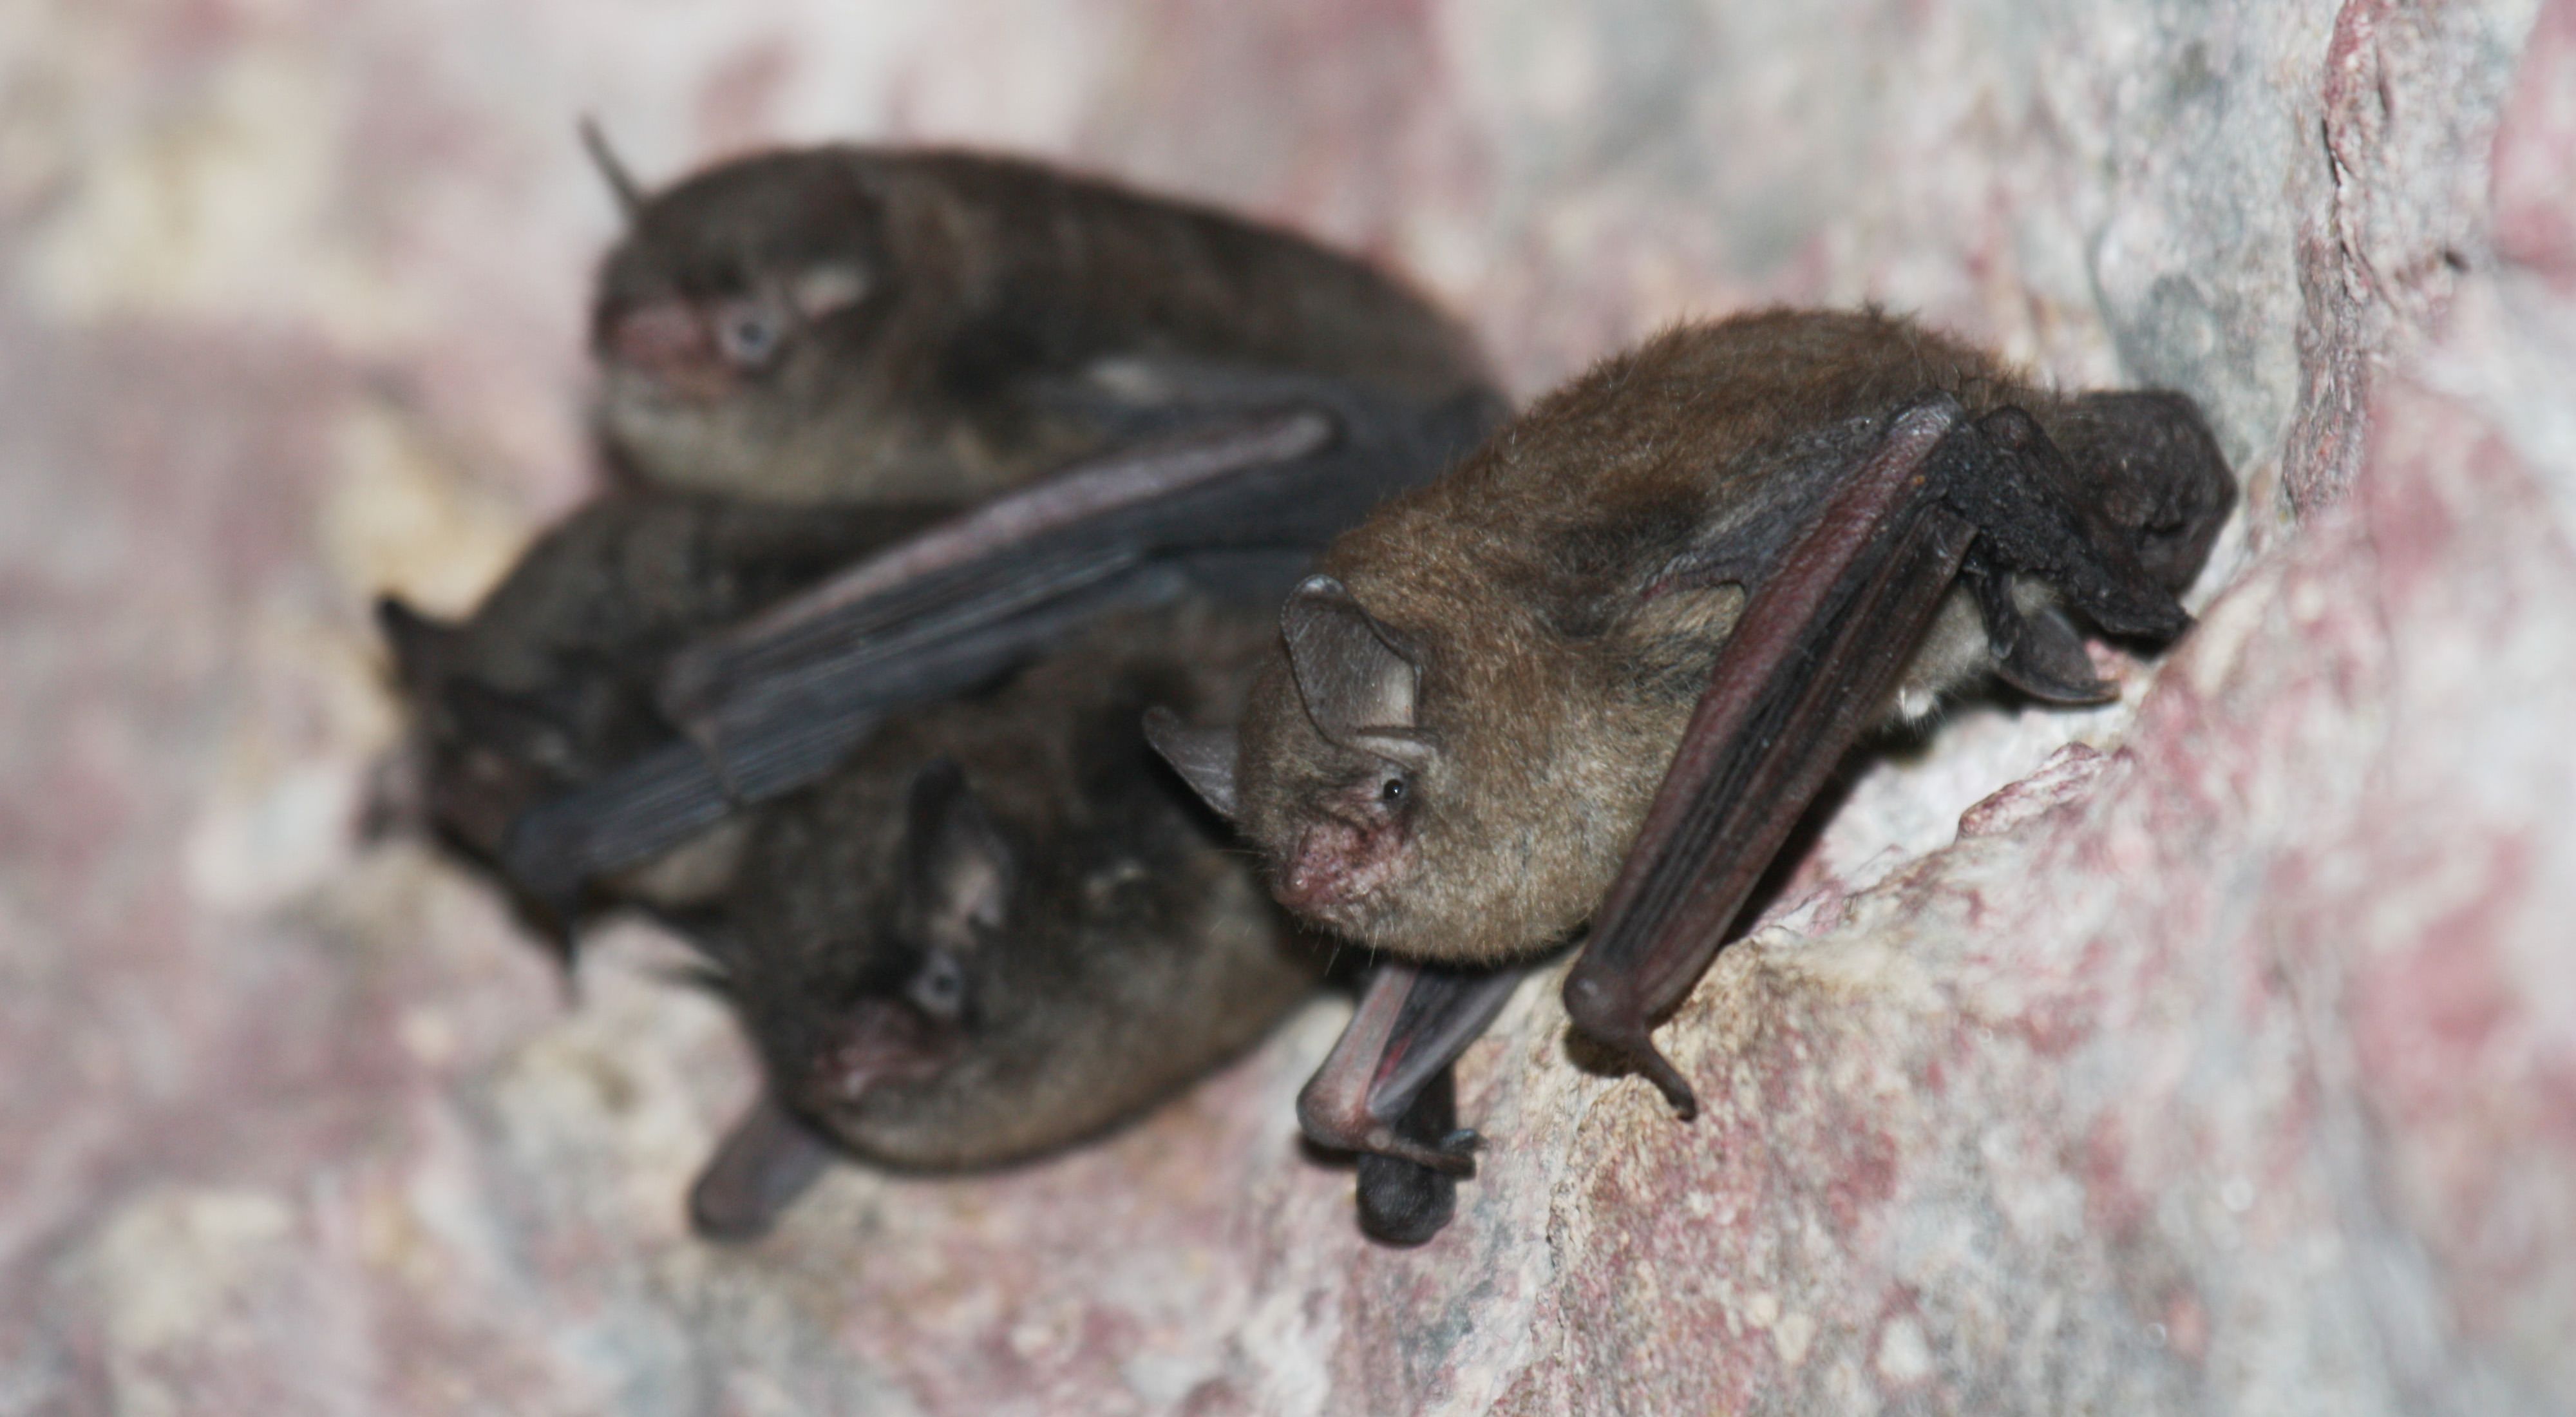 Small cluster of brown Indiana bats cling to cave wall.